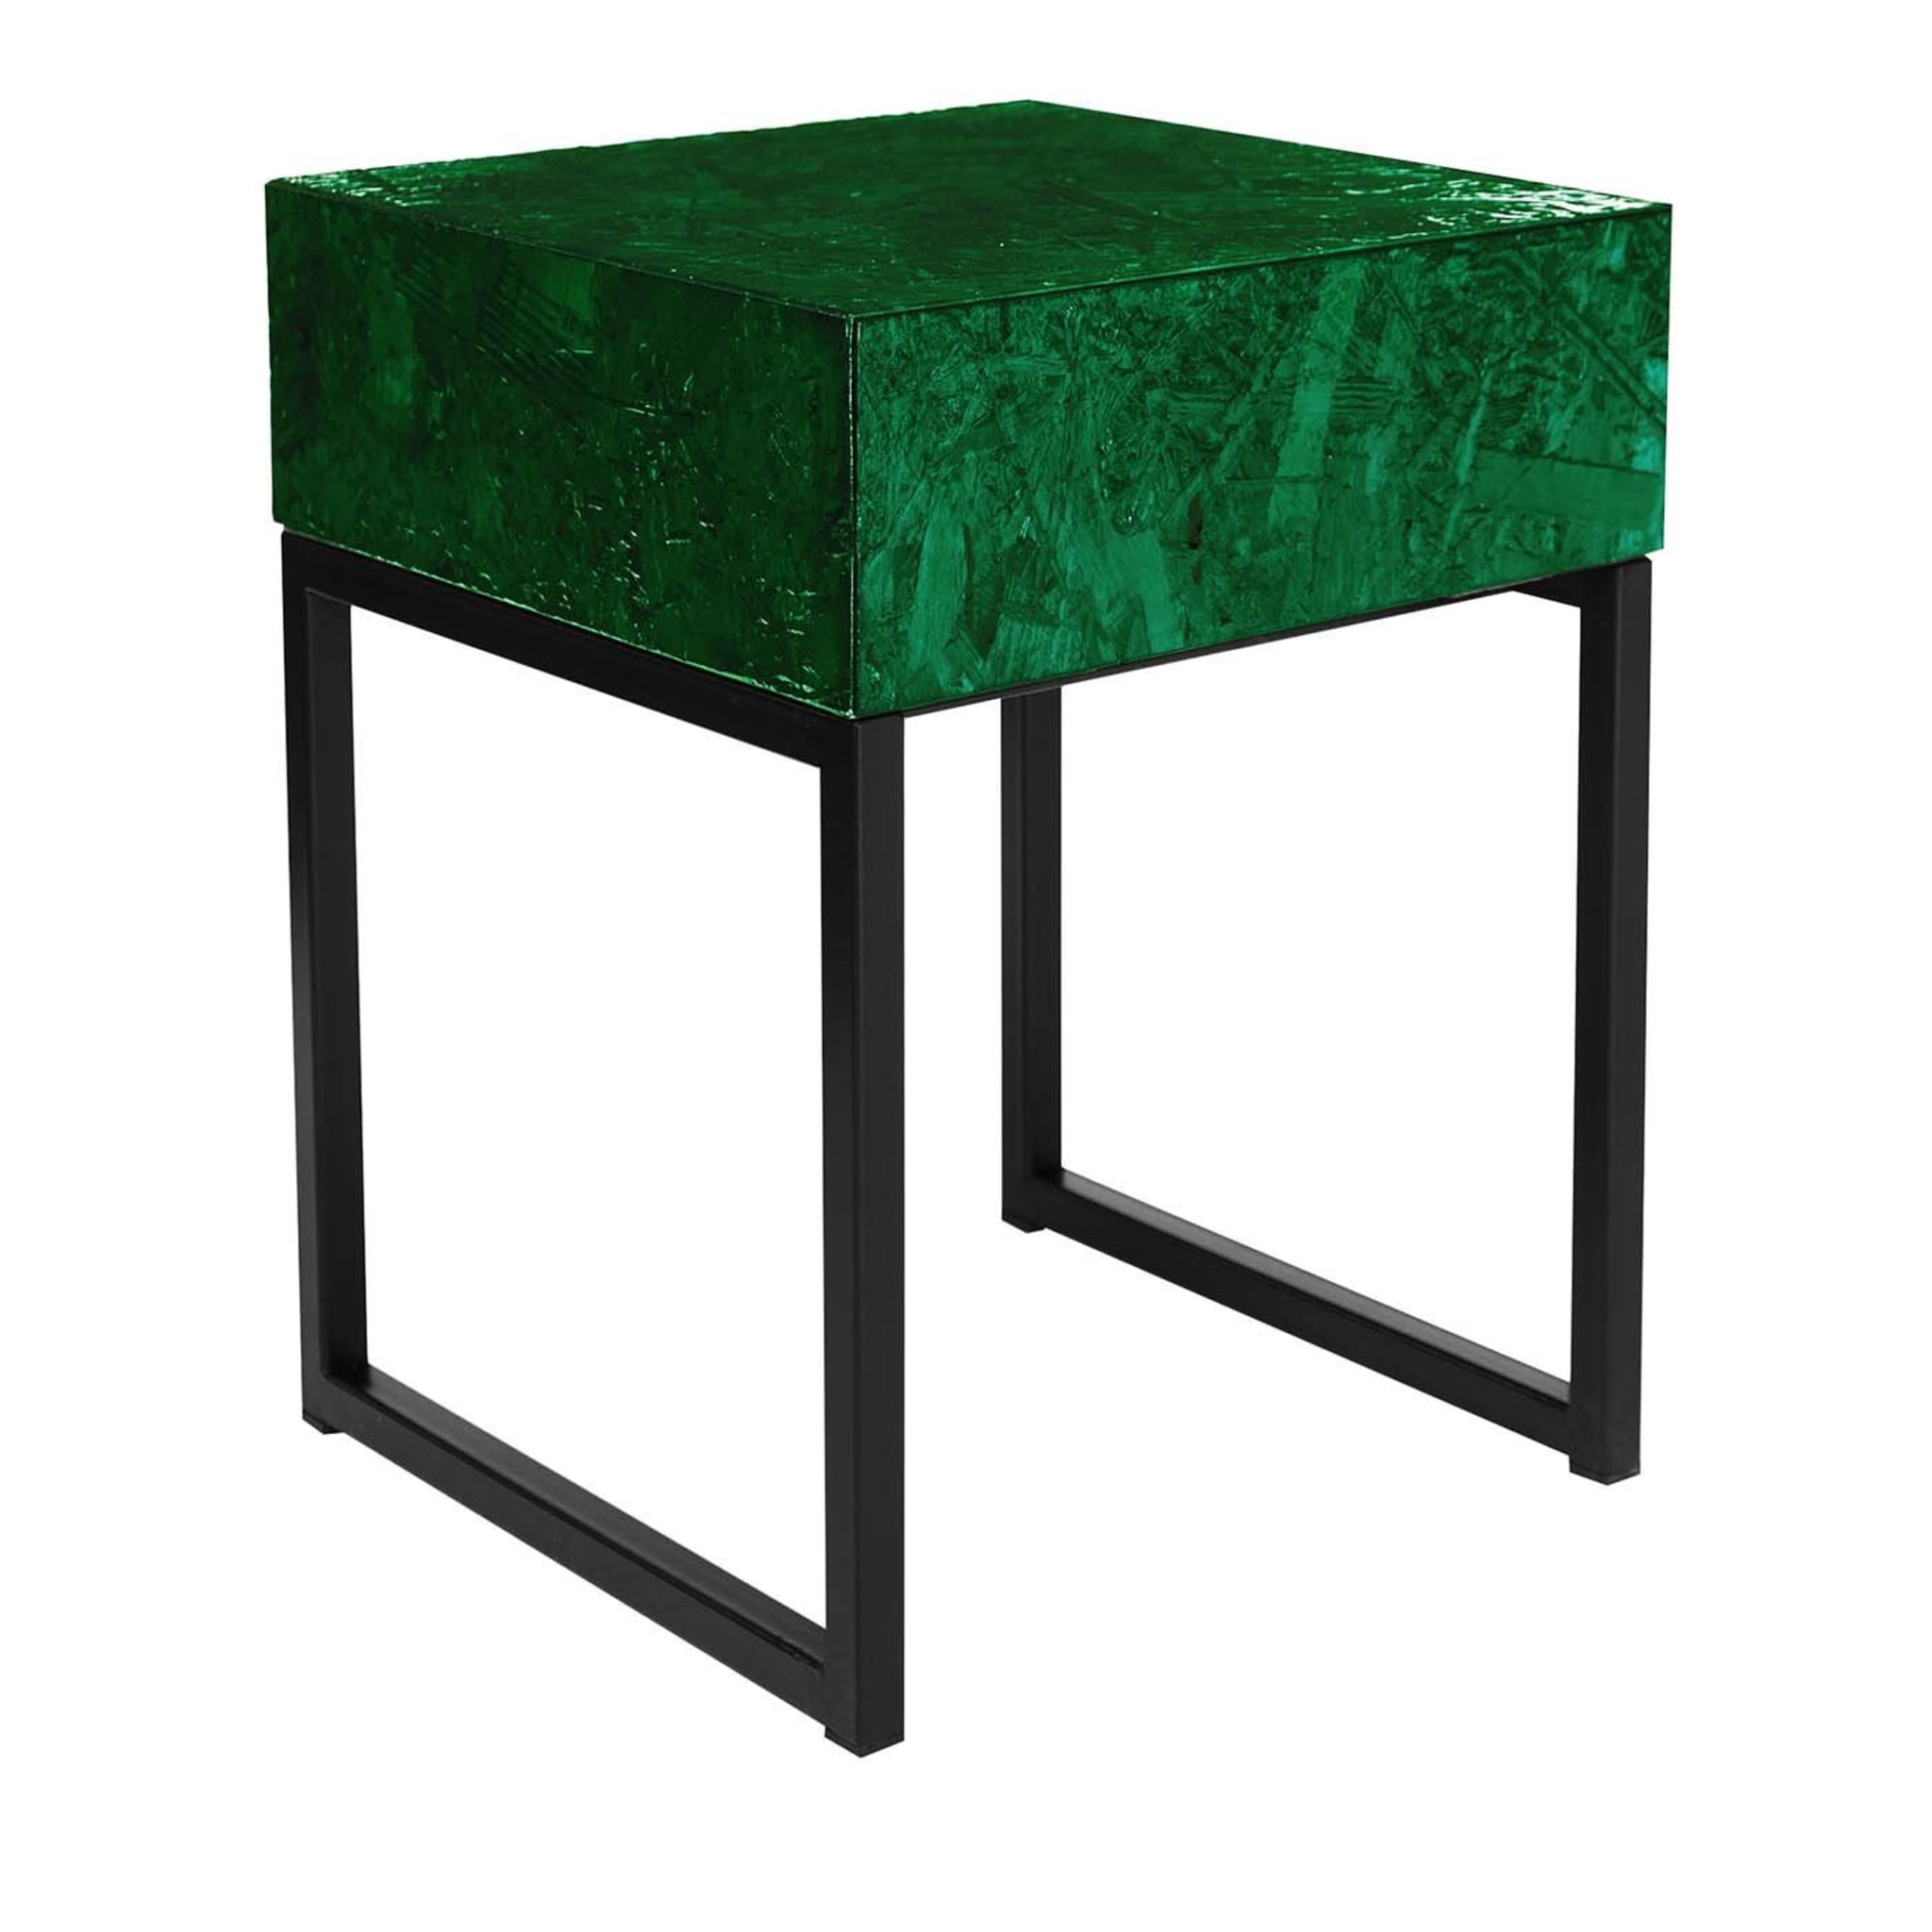 Spring Bedside Table With Drawer Green by Fabrizio Contaldo  - Main view